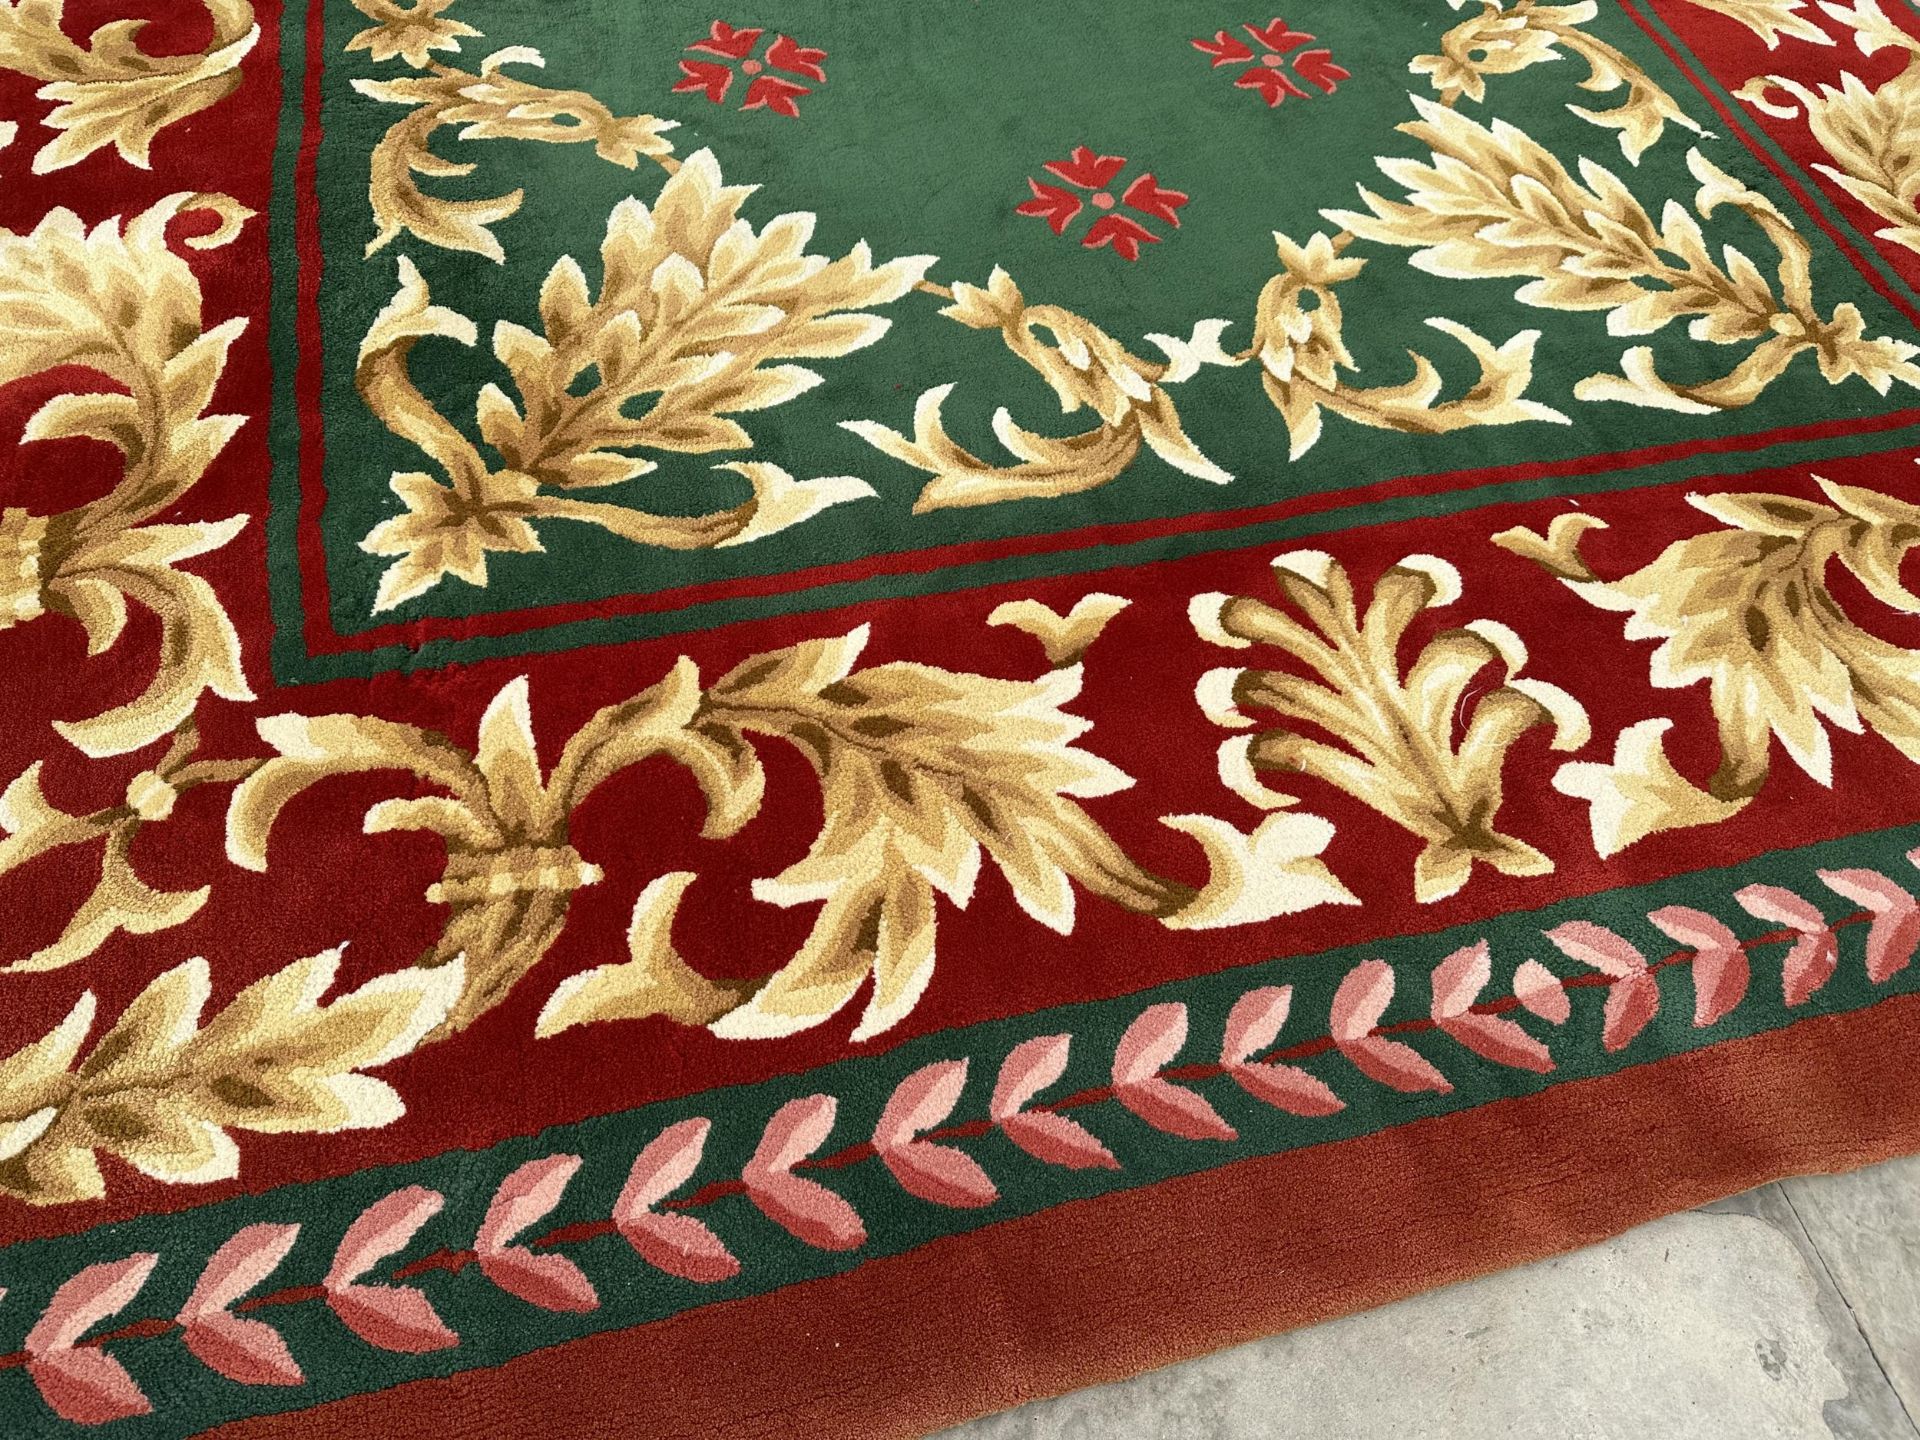 A LARGE GREEN, RED AND GOLD 200 OUNCE PURE WOOL RUG, - 485 CM X 358 CM (COST £8000 FROM SIGNATURE - Bild 3 aus 9